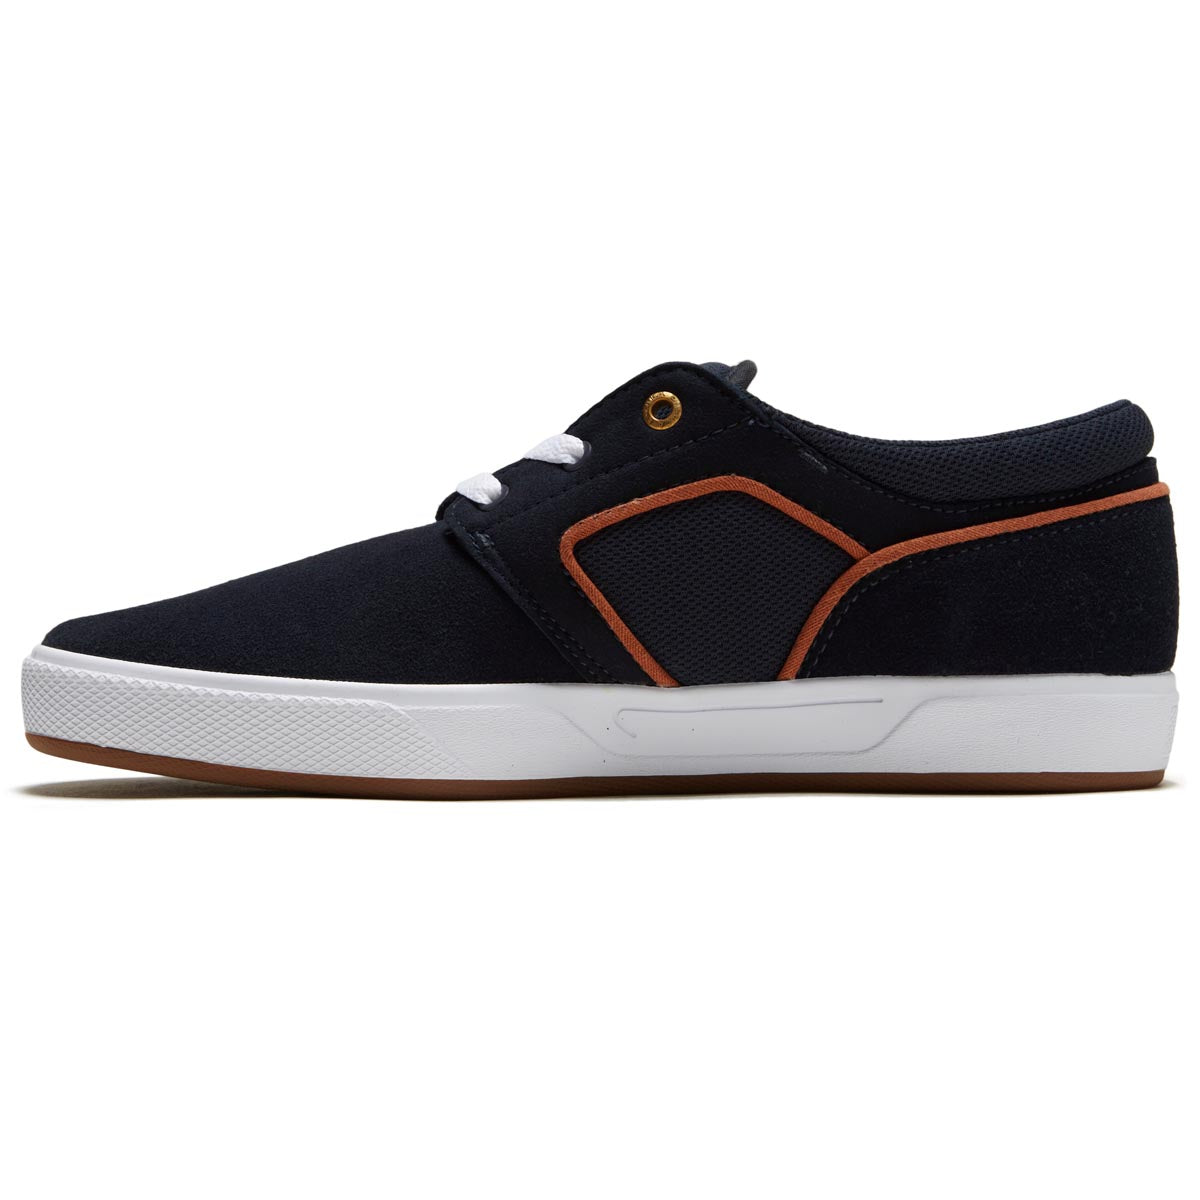 Emerica Figgy G6 Shoes - Navy image 2